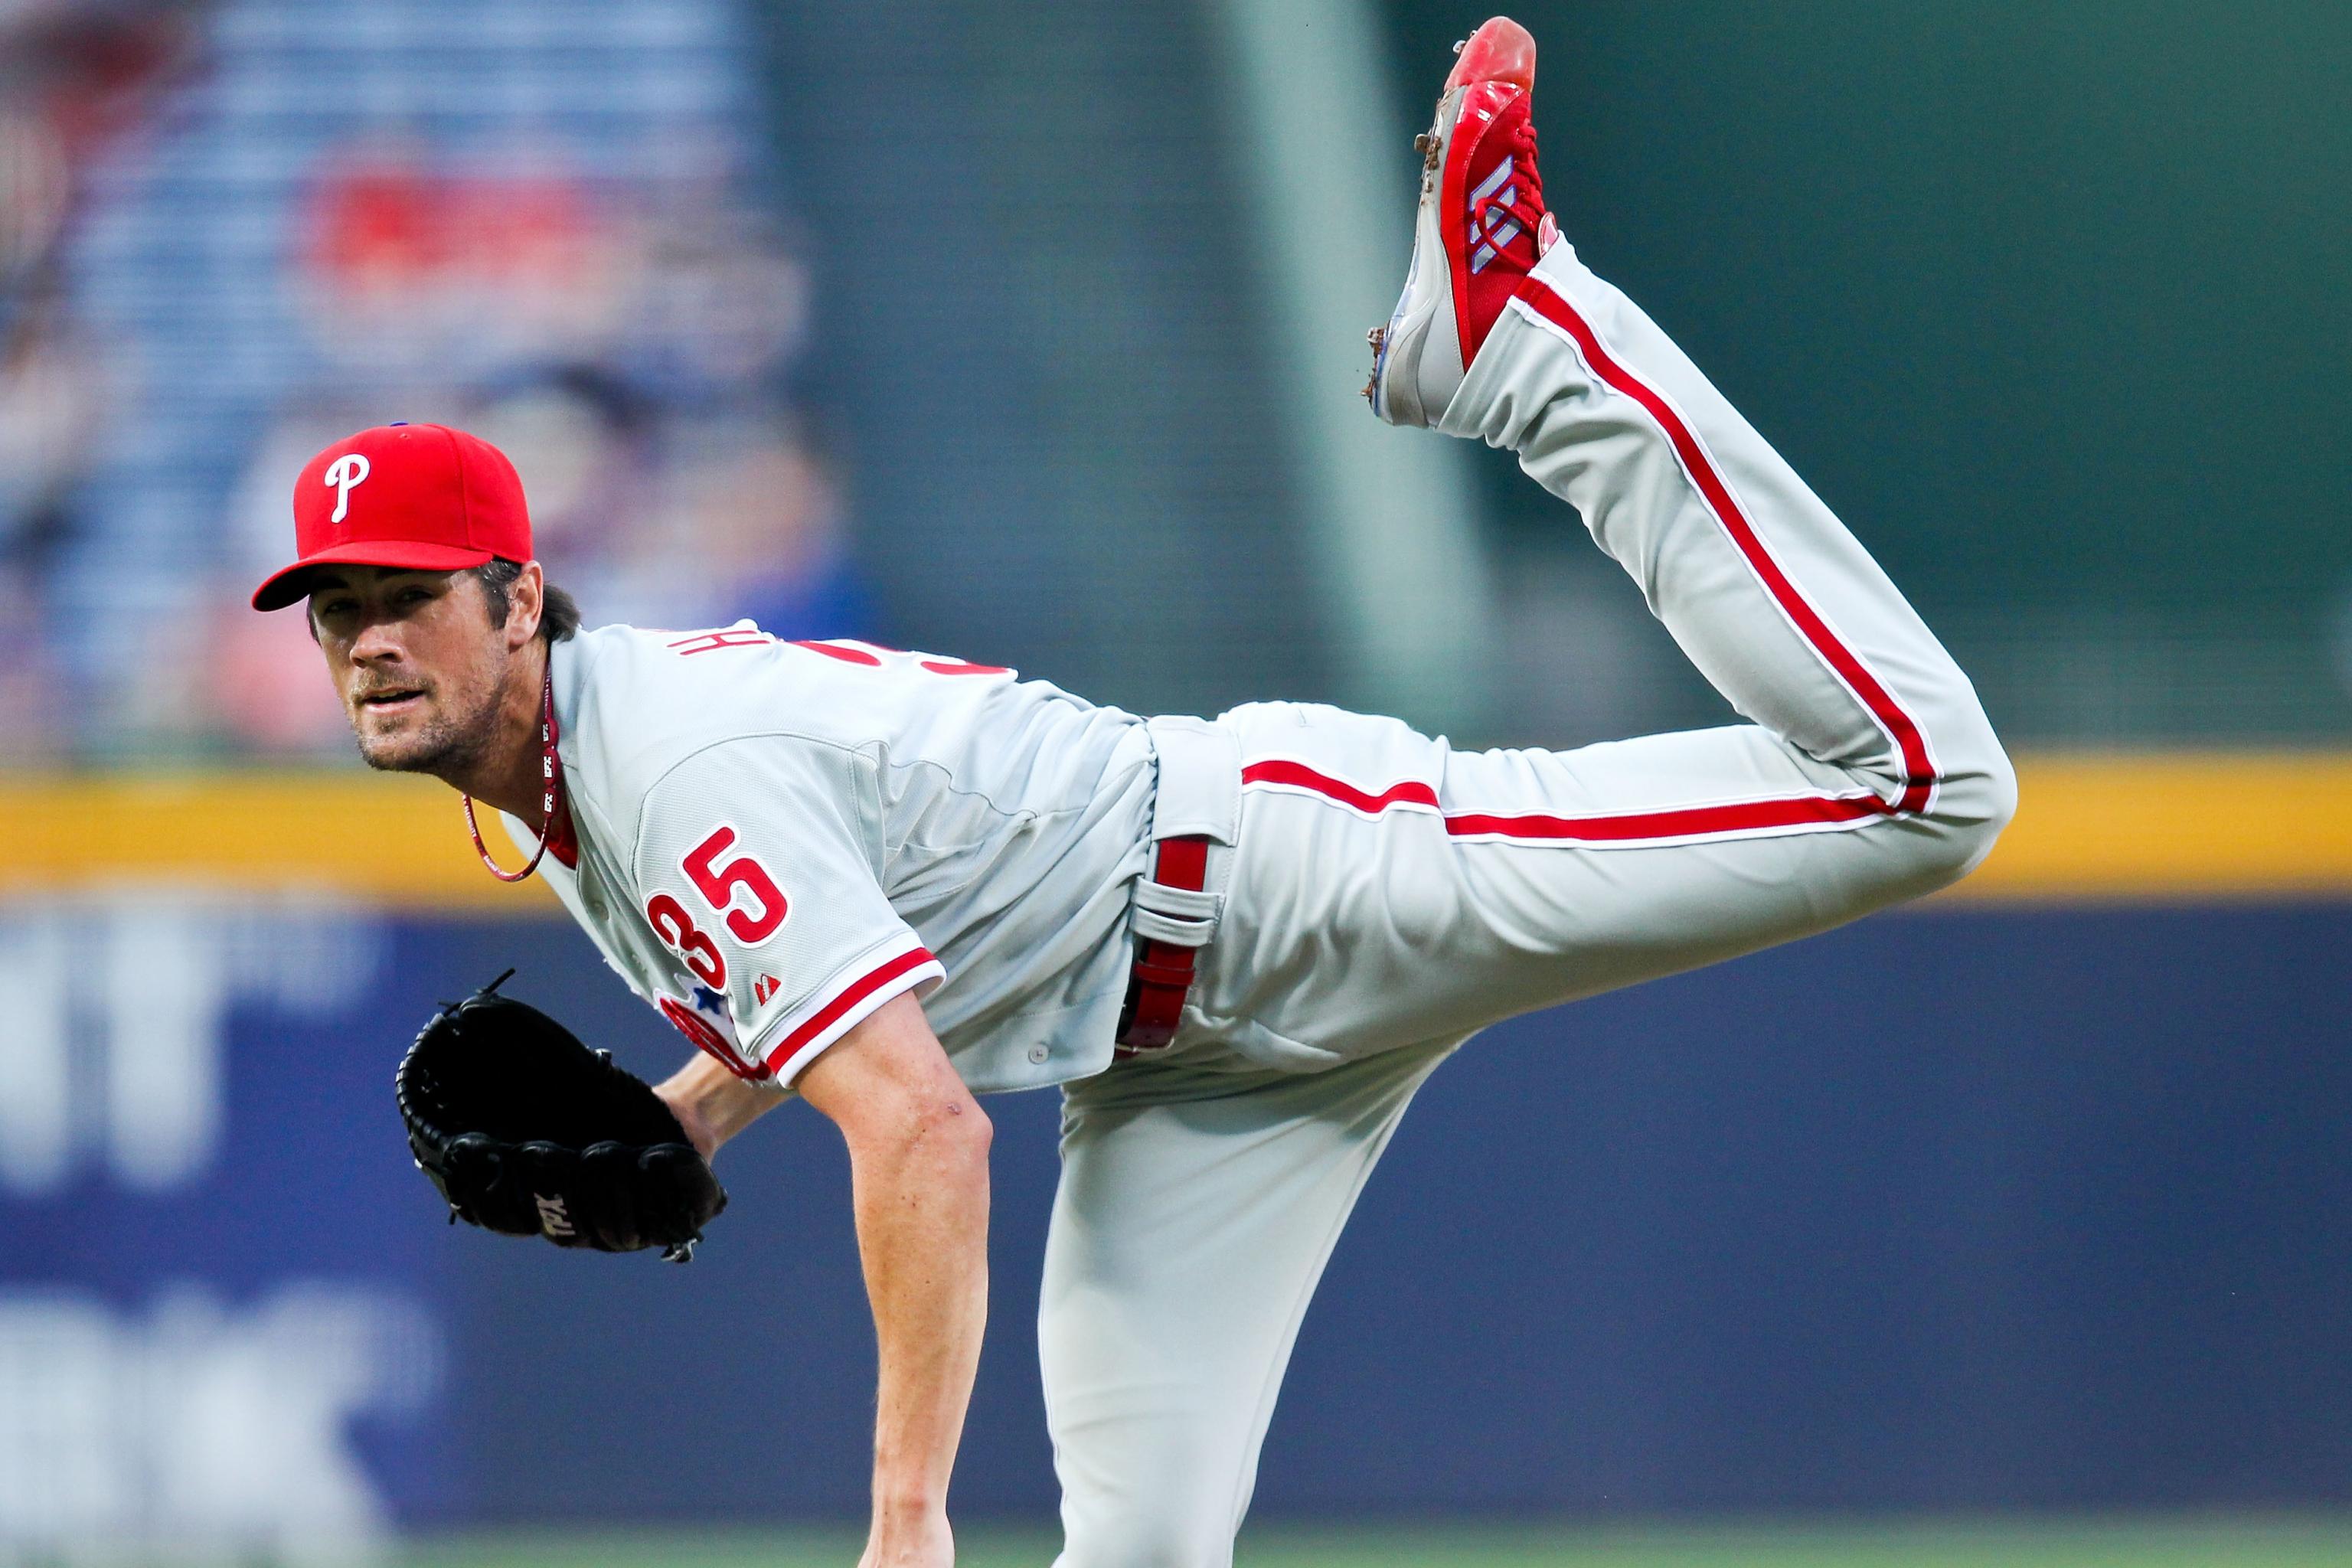 Cole Hamels faces Phillies for first time